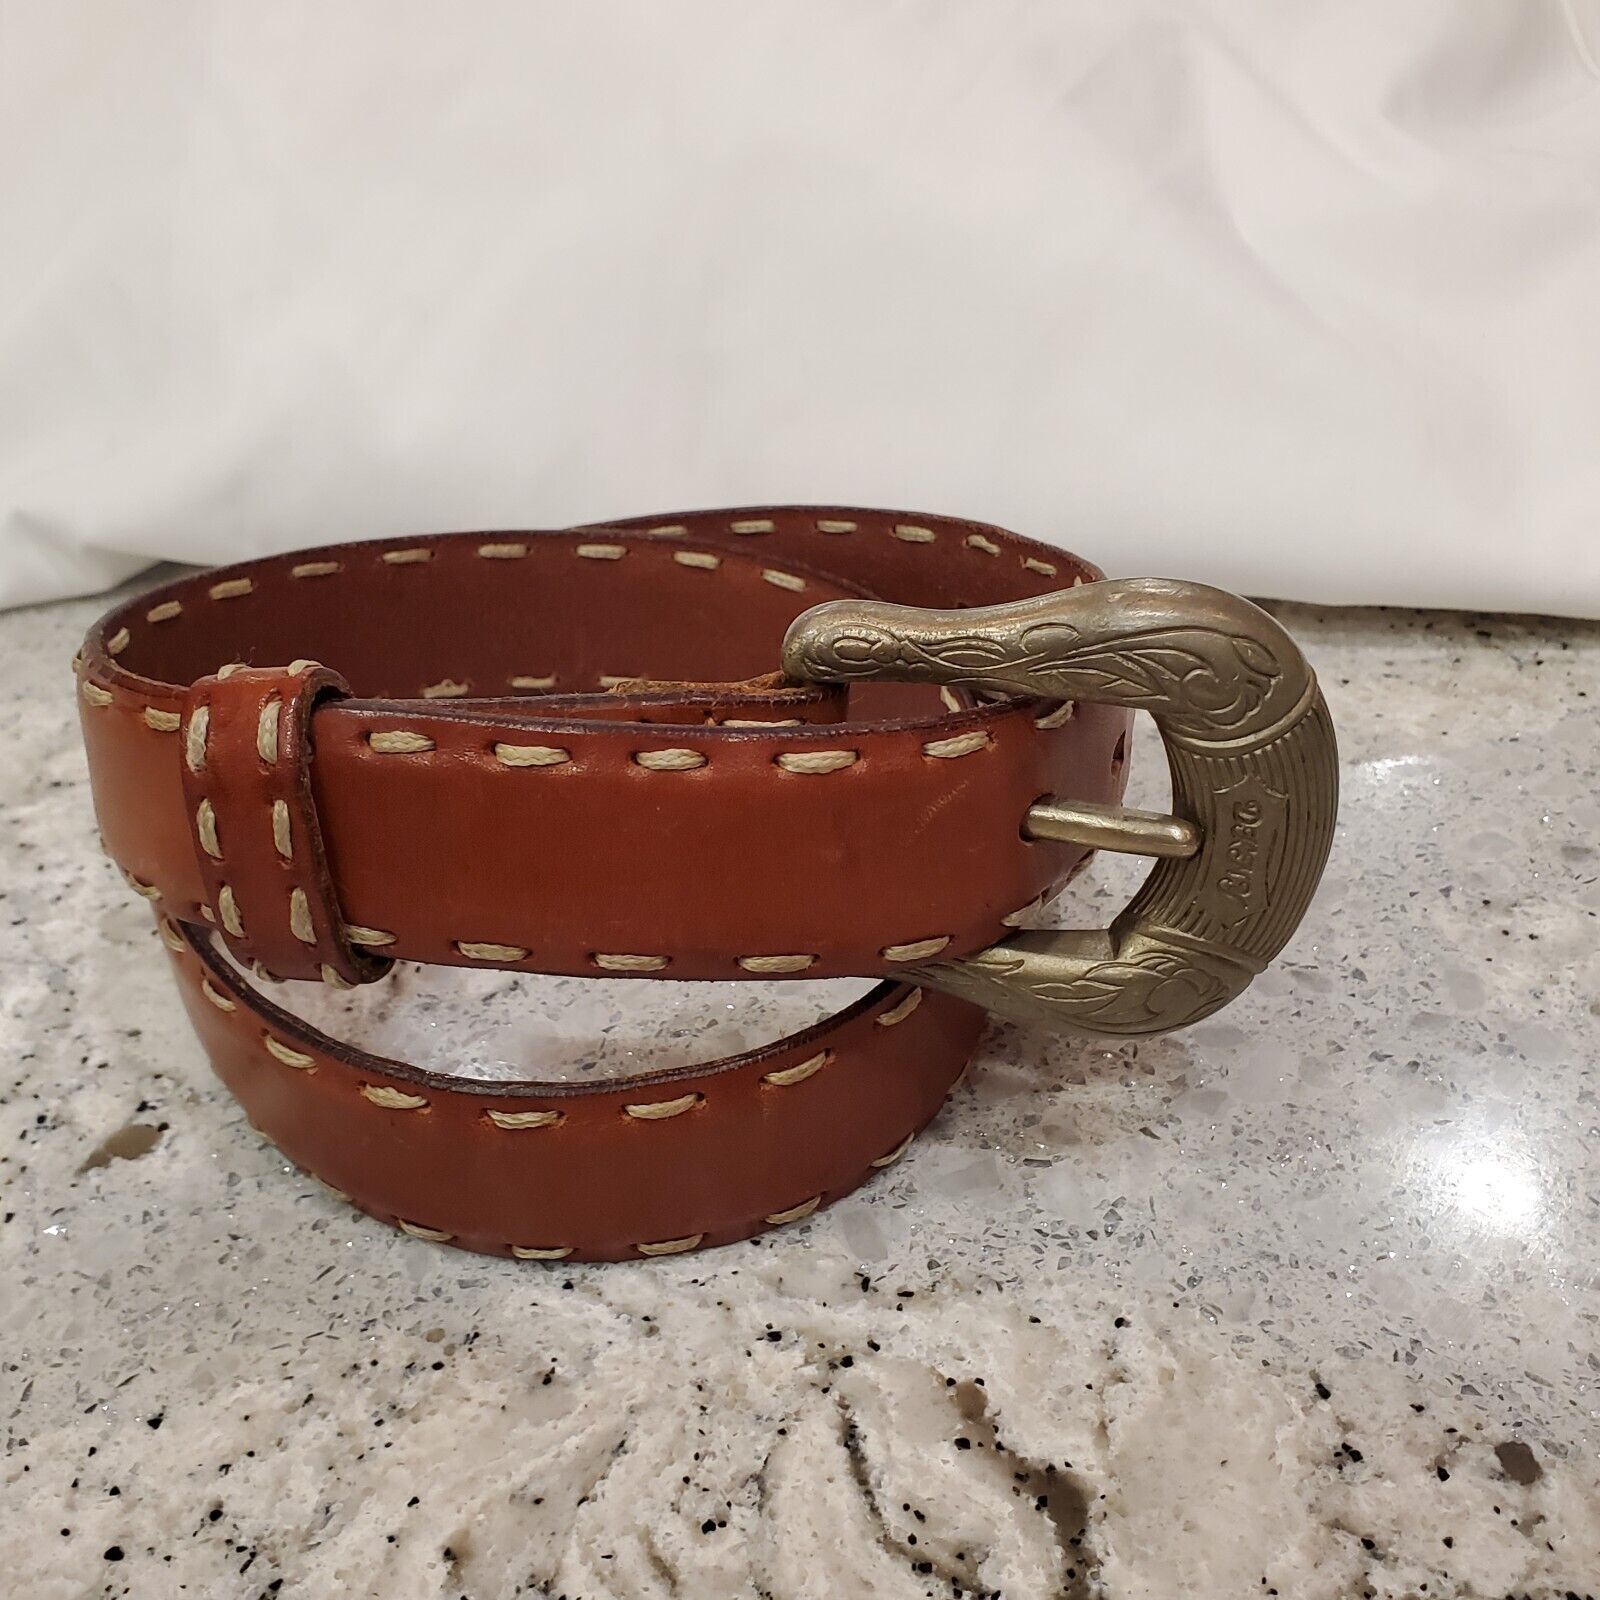 DKNY Genuine Leather Belt Unisex Brown Stitched 36\